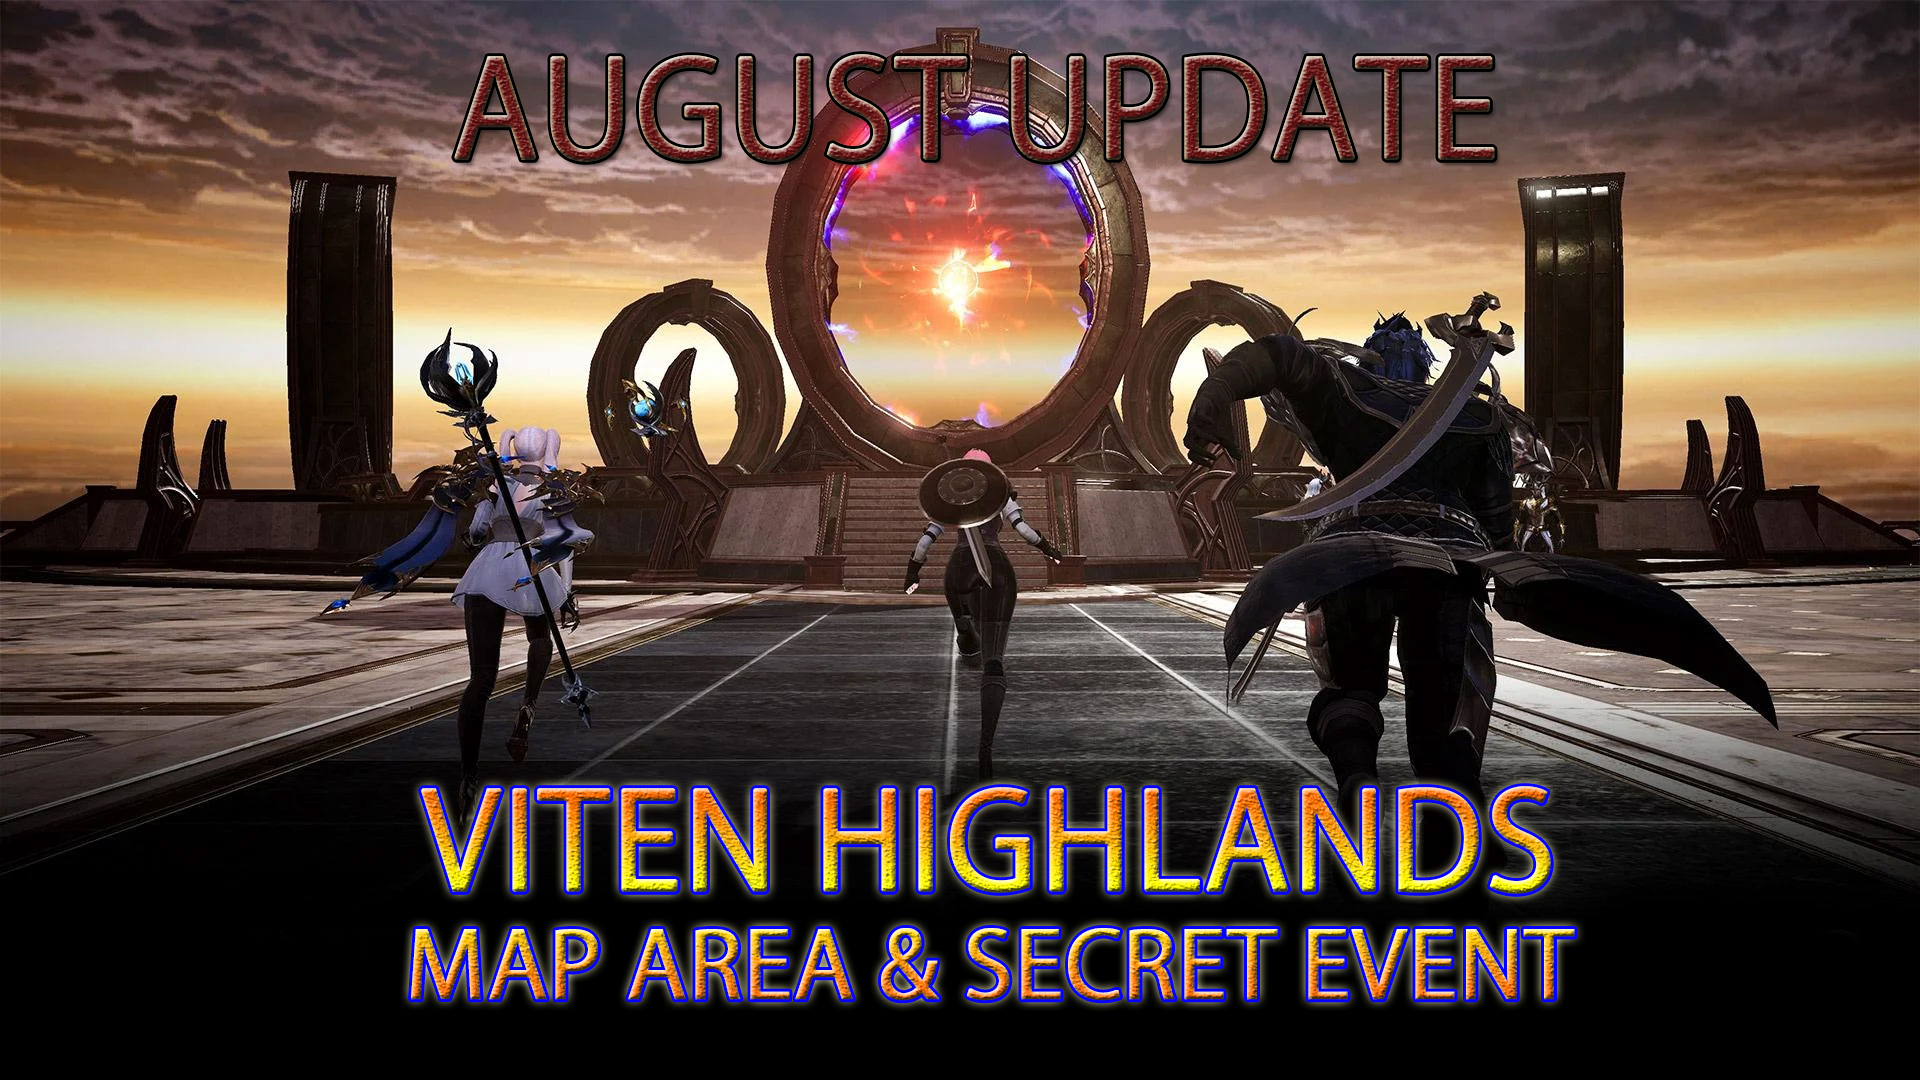 Nexon’s V4 August Update Brings a New Region and Other Additions to the Popular MMORPG